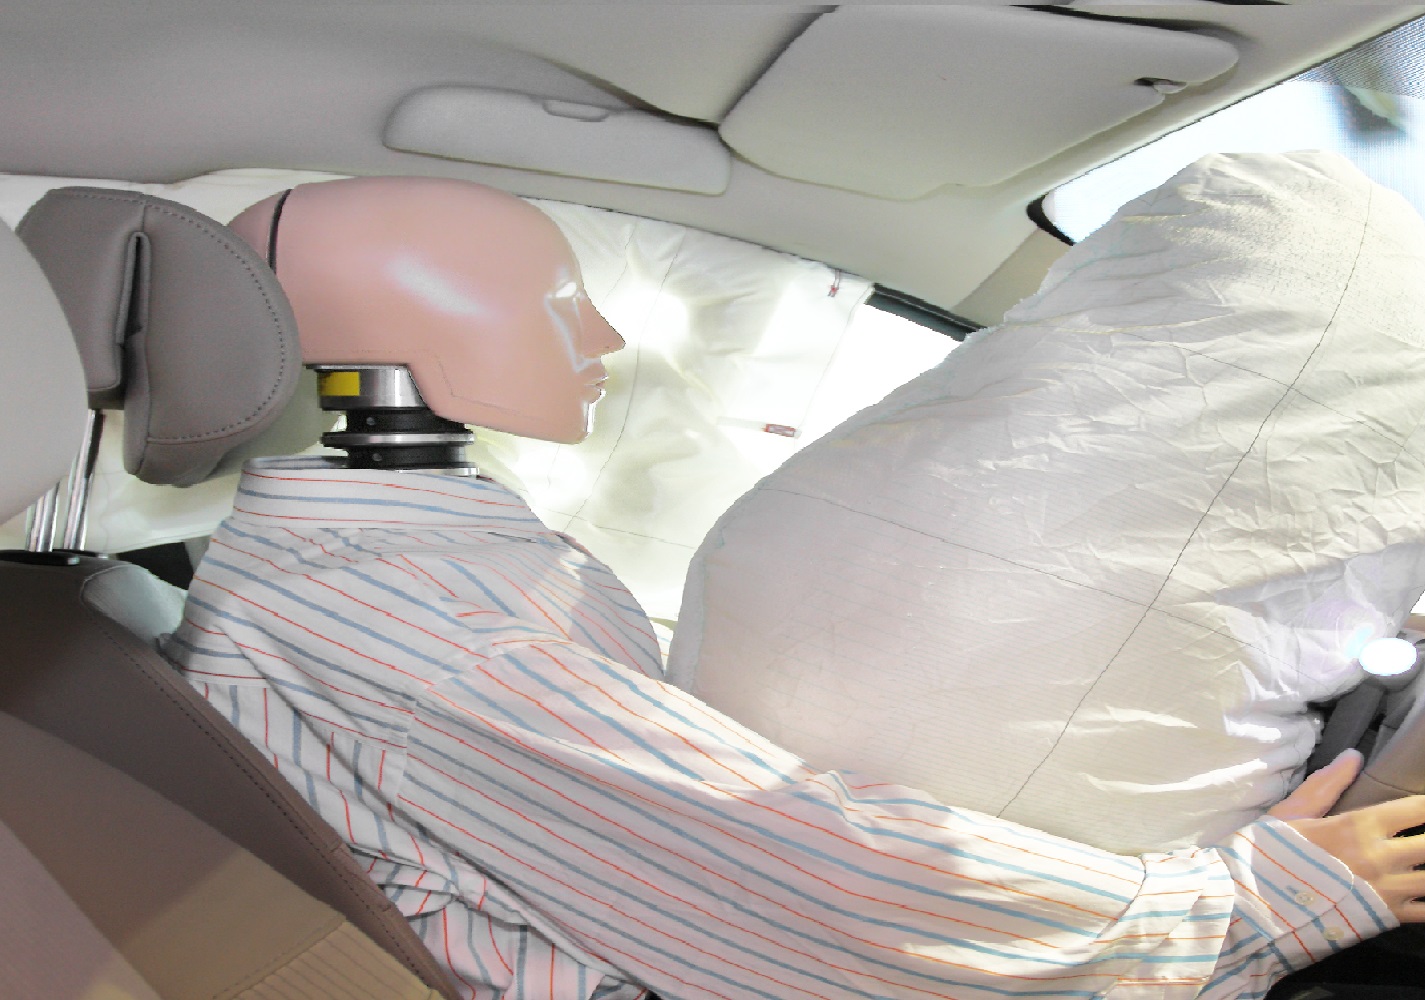 Infrared Real-time Pyrometer can be used to test automobiles air bags for Electromagnetic Interference (EMI).